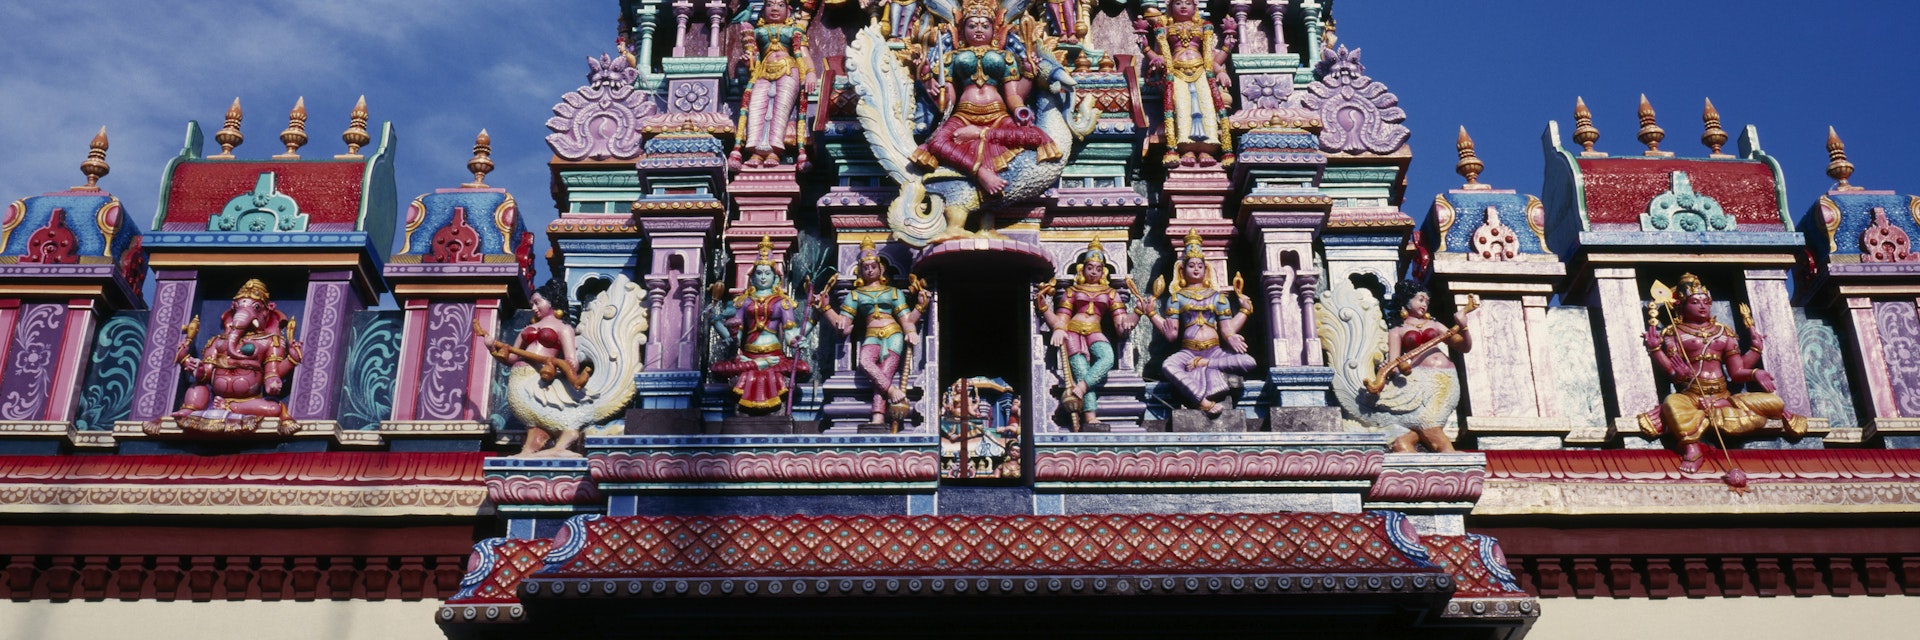 malaysia, penang, georgetown, sri mariamman temple. part view of exterior roof and gopuram painted tower decorated with brightly painted figures of hindu gods and characters.